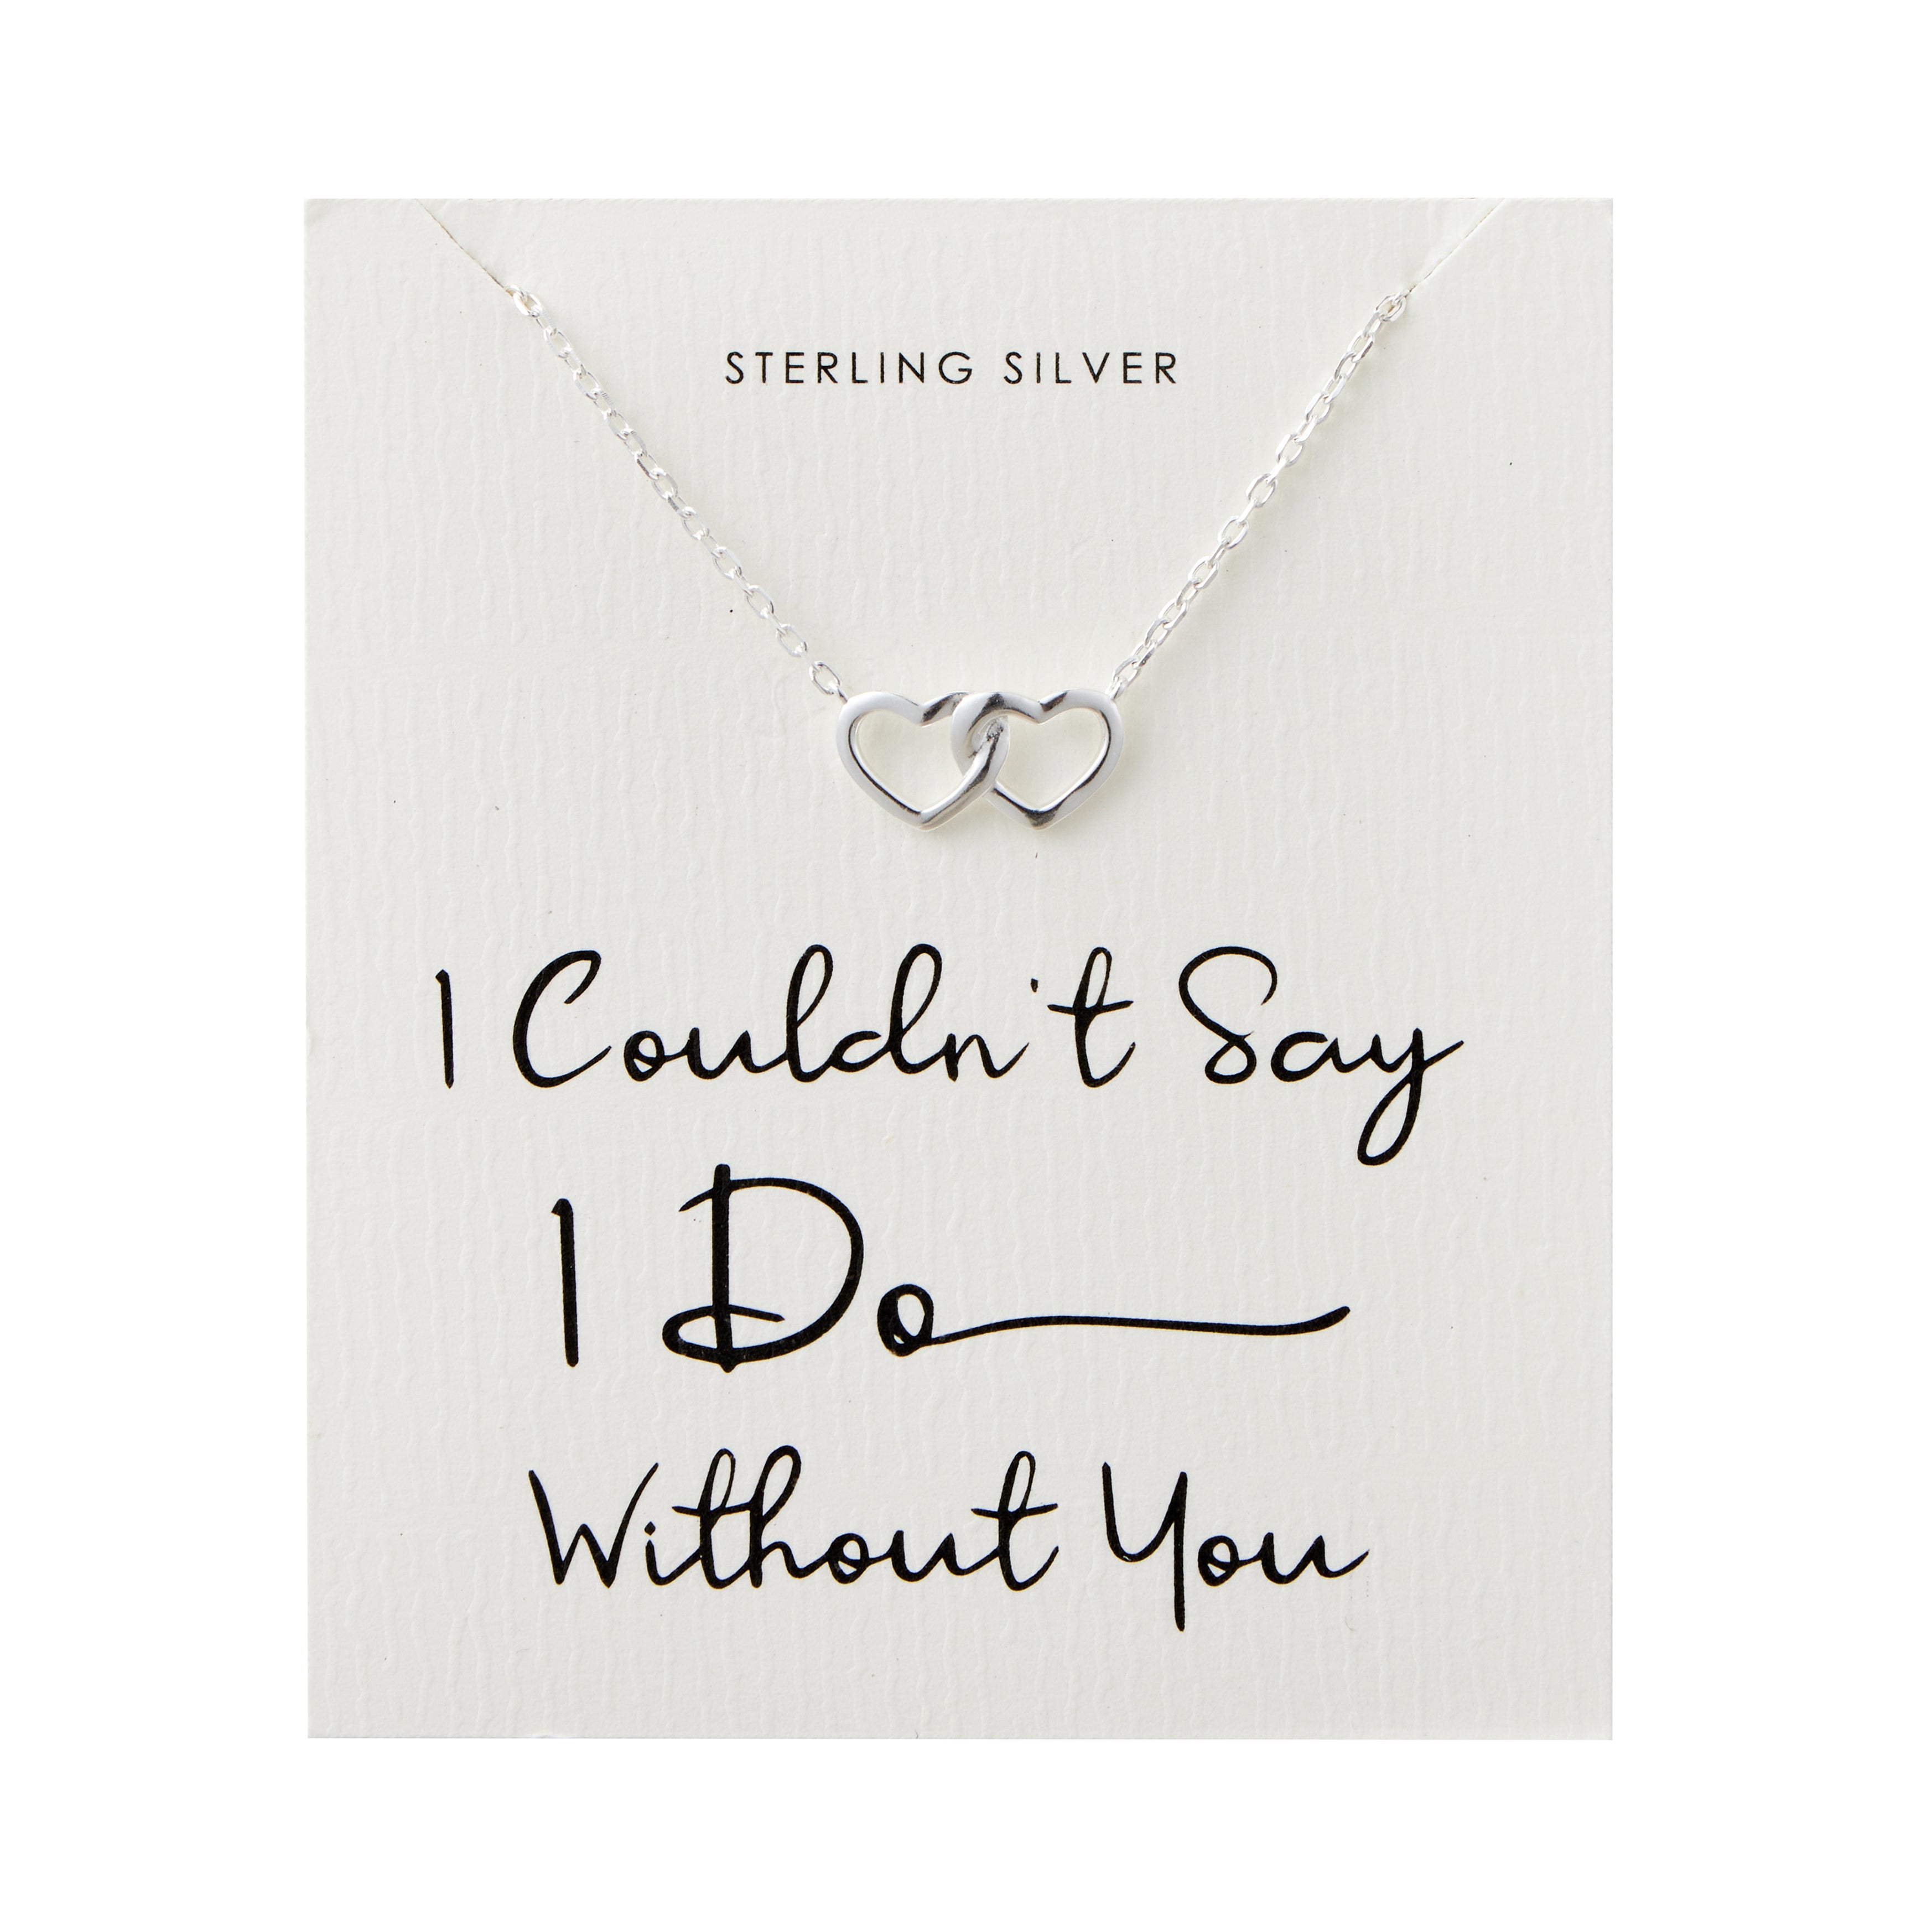 Sterling Silver I Couldn't Say I Do Without You Heart Link Necklace